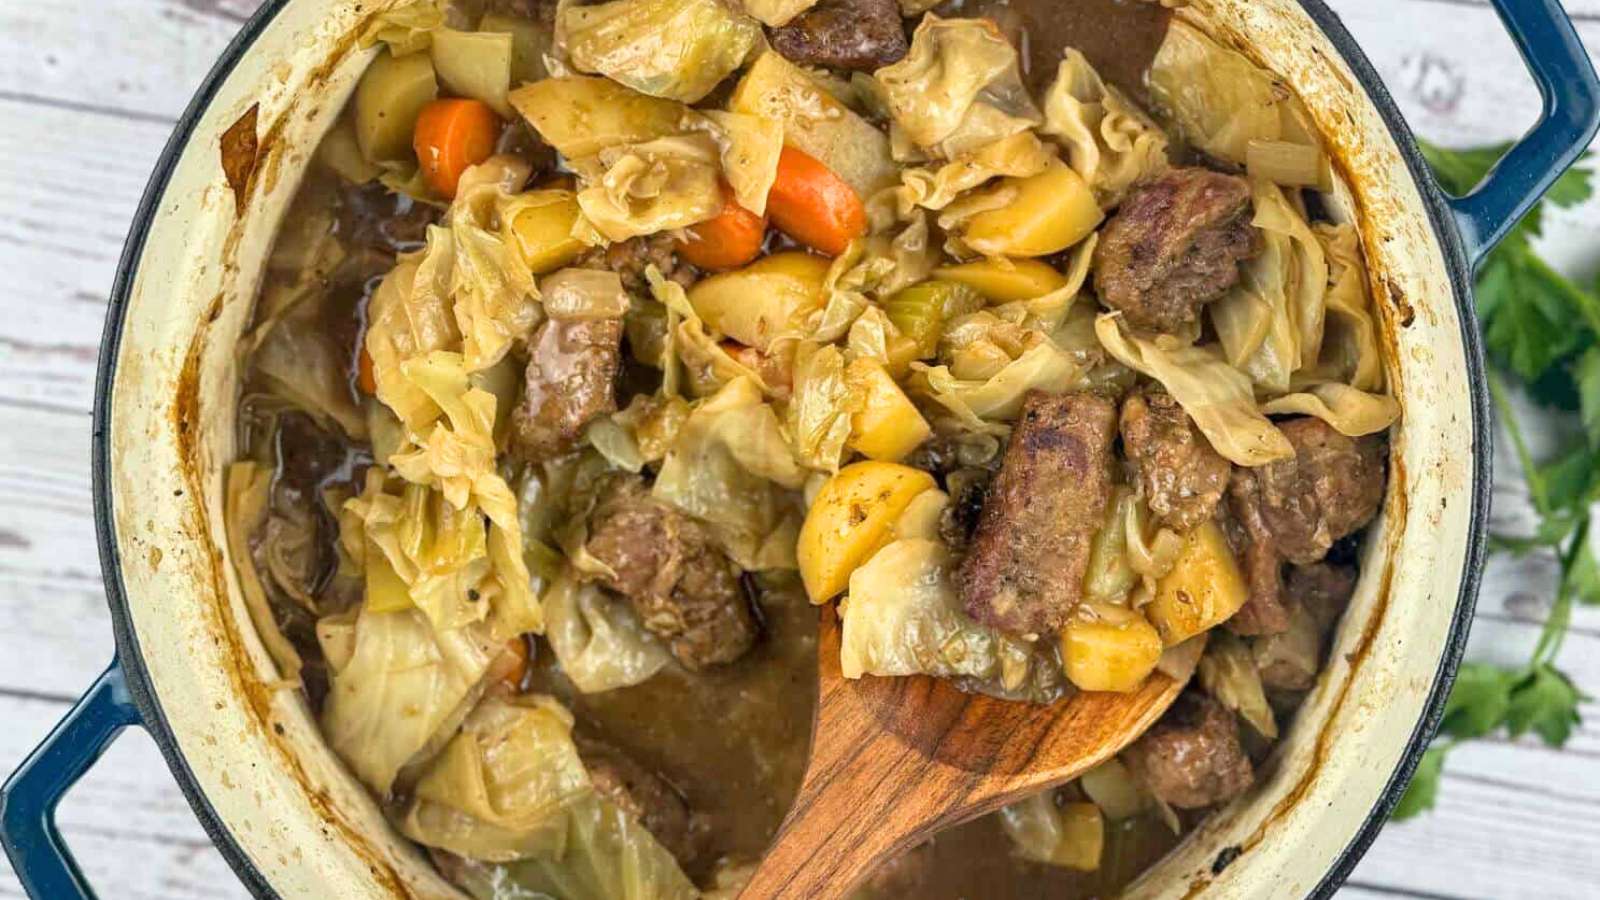 A hearty stew made with meat and cabbage, enhanced with the rich and unique flavor of Guinness beer.